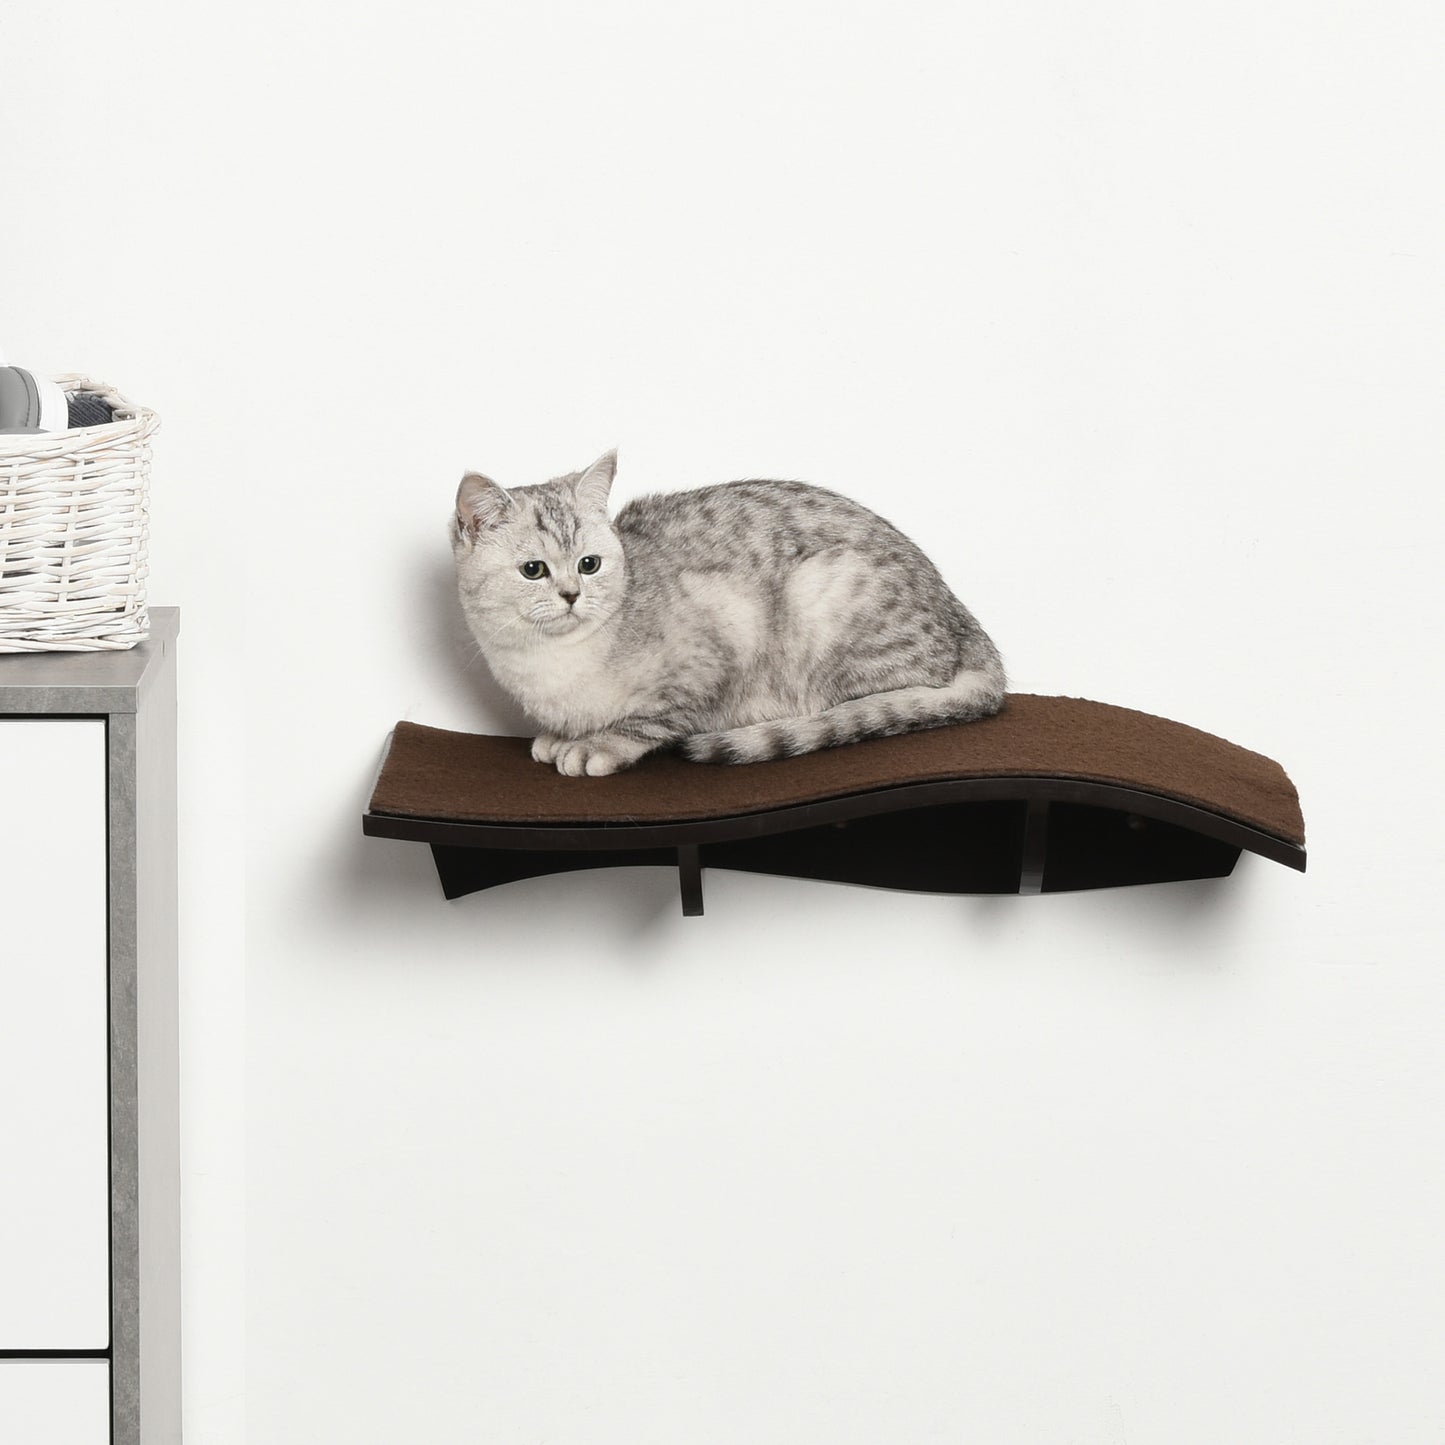 PawHut Wall Mounted Cat Shelf Perch Kitten Bed w/ Removable Carpet Accessories